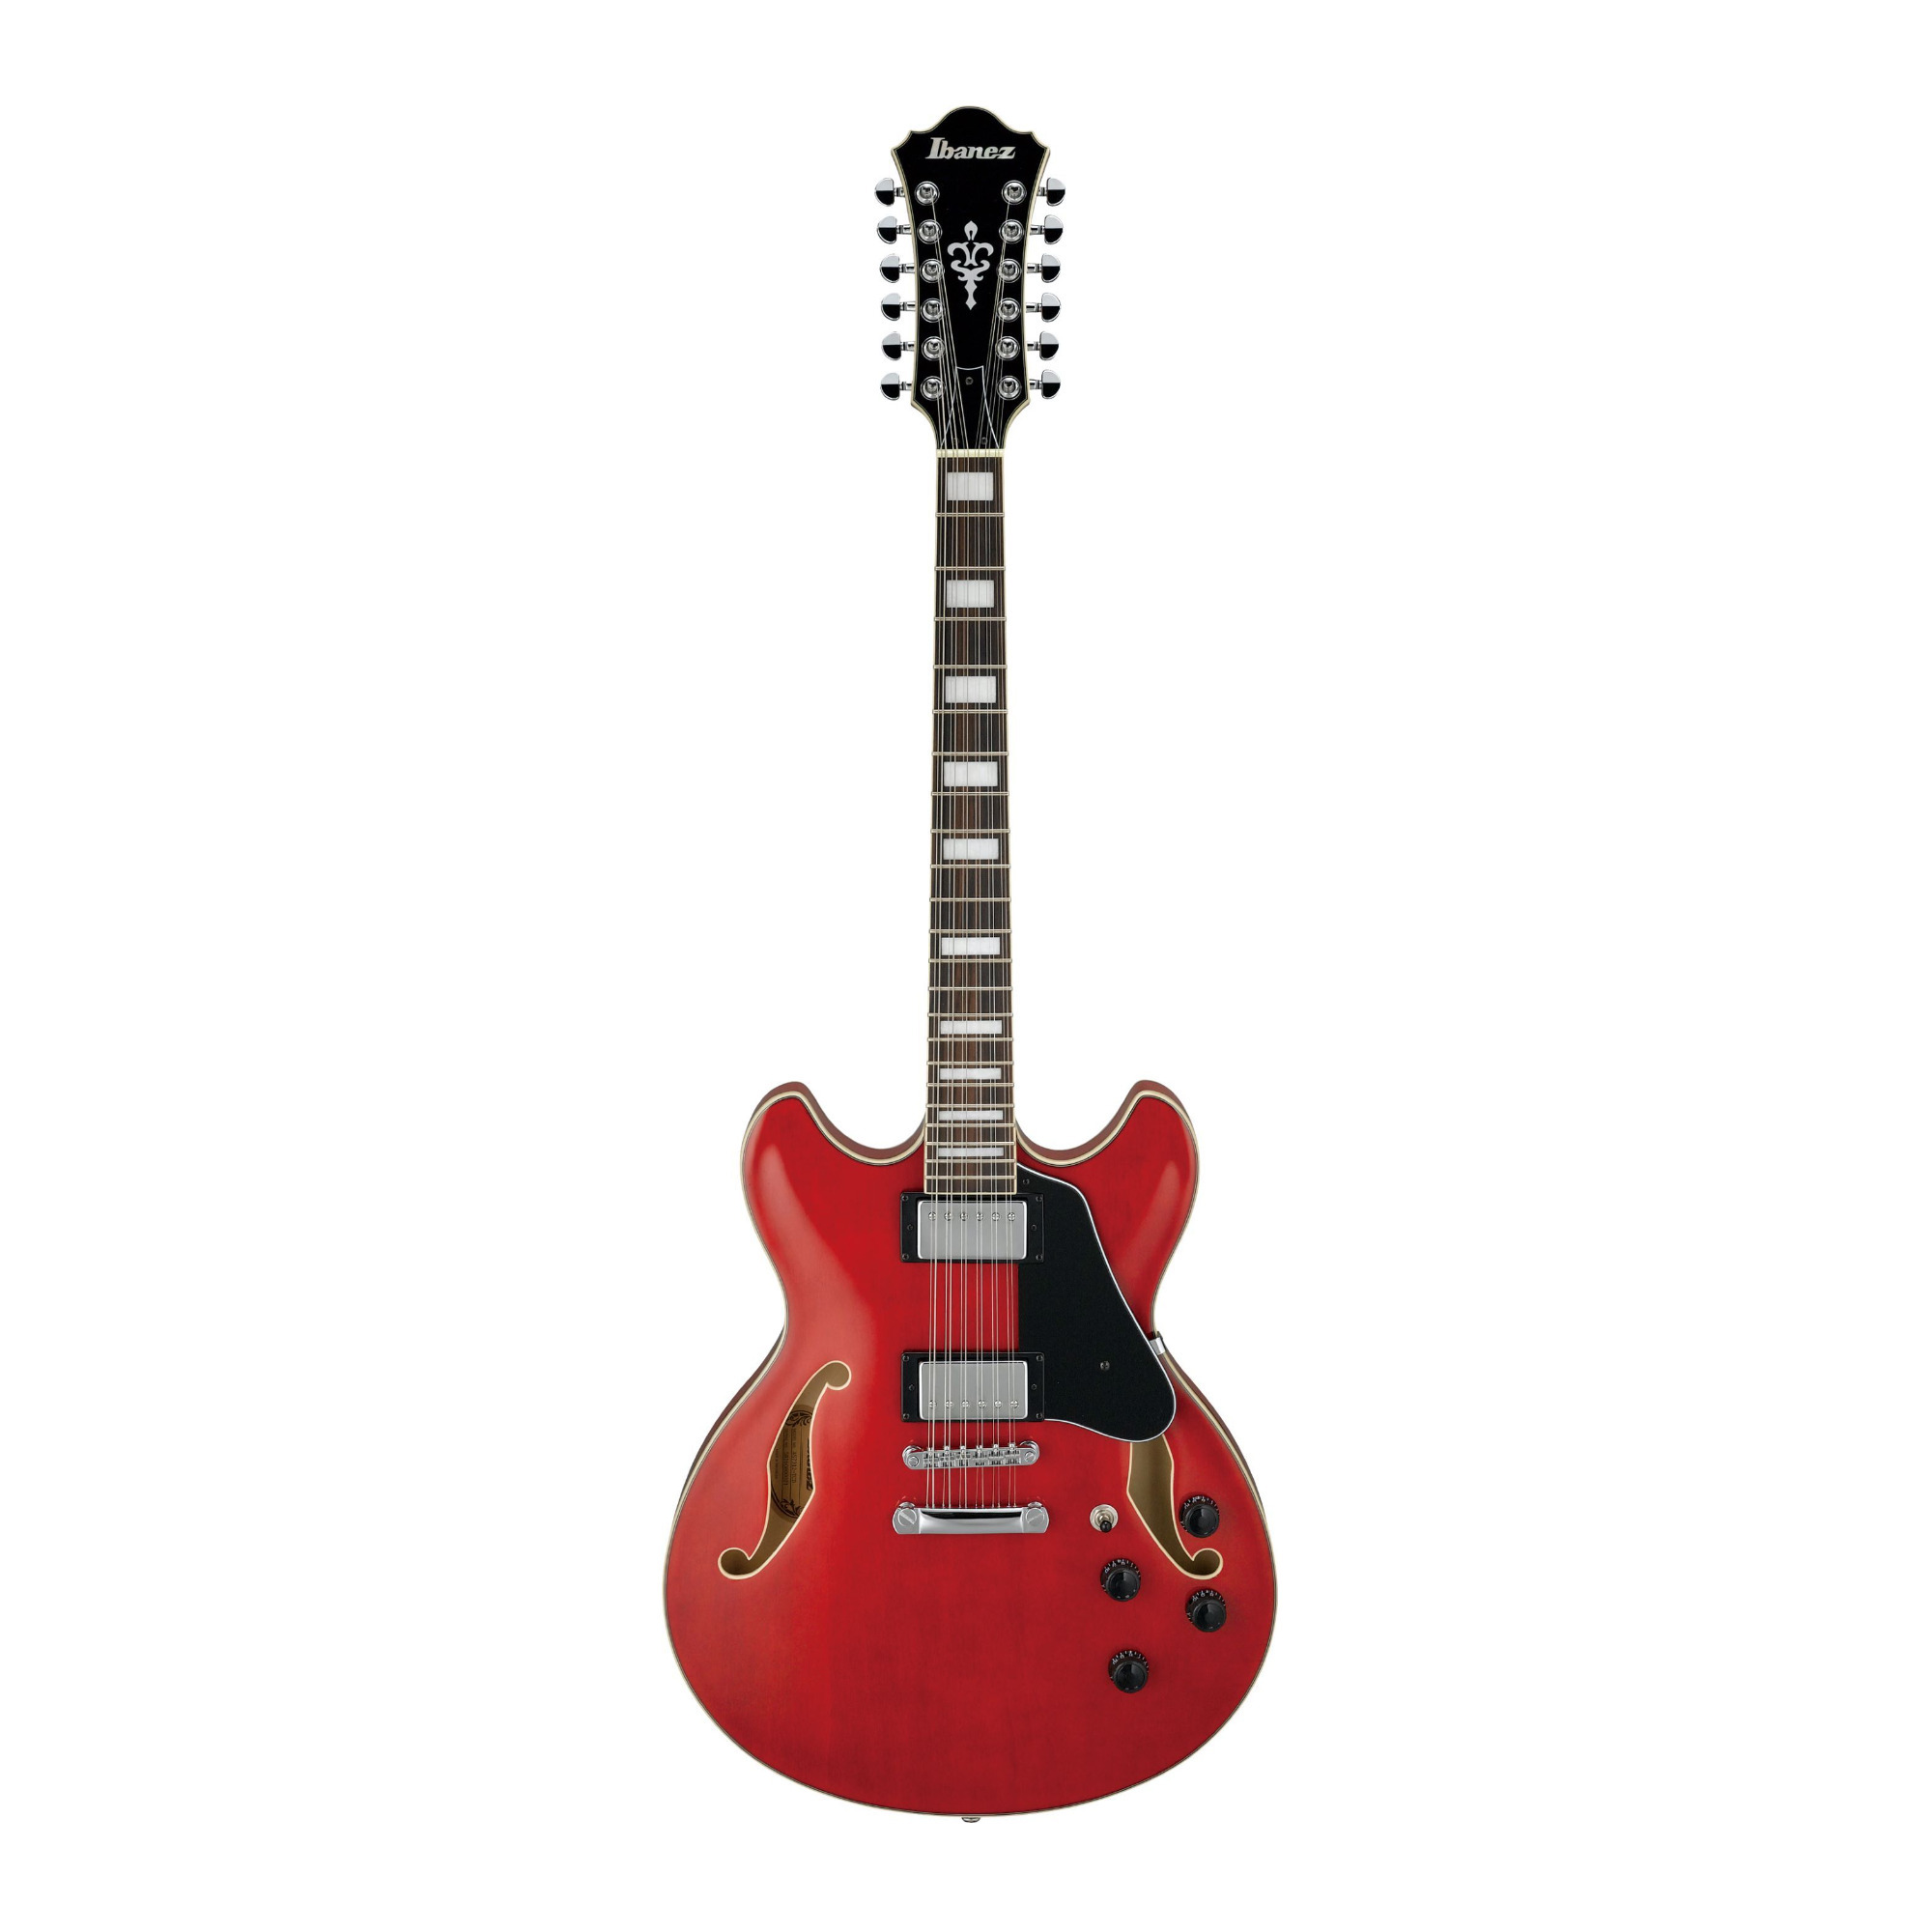 Ibanez AS Artcore 12-String Electric Guitar (Right-Handed, Transparent Cherry Red) -  AS7312TCD